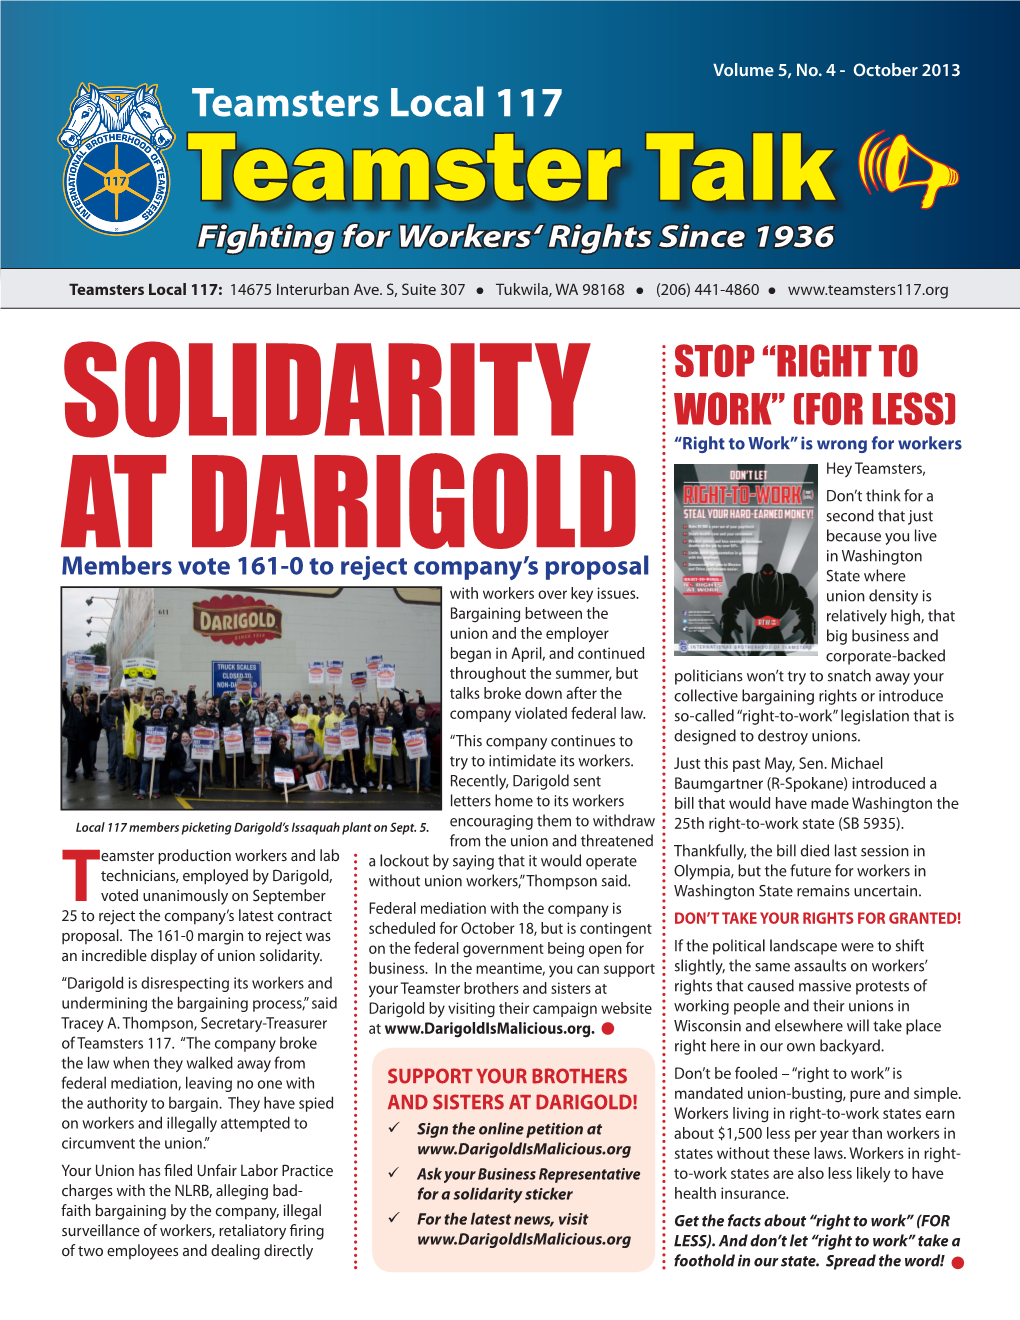 Teamster Talk U Fighting for Workers‘ Rights Since 1936